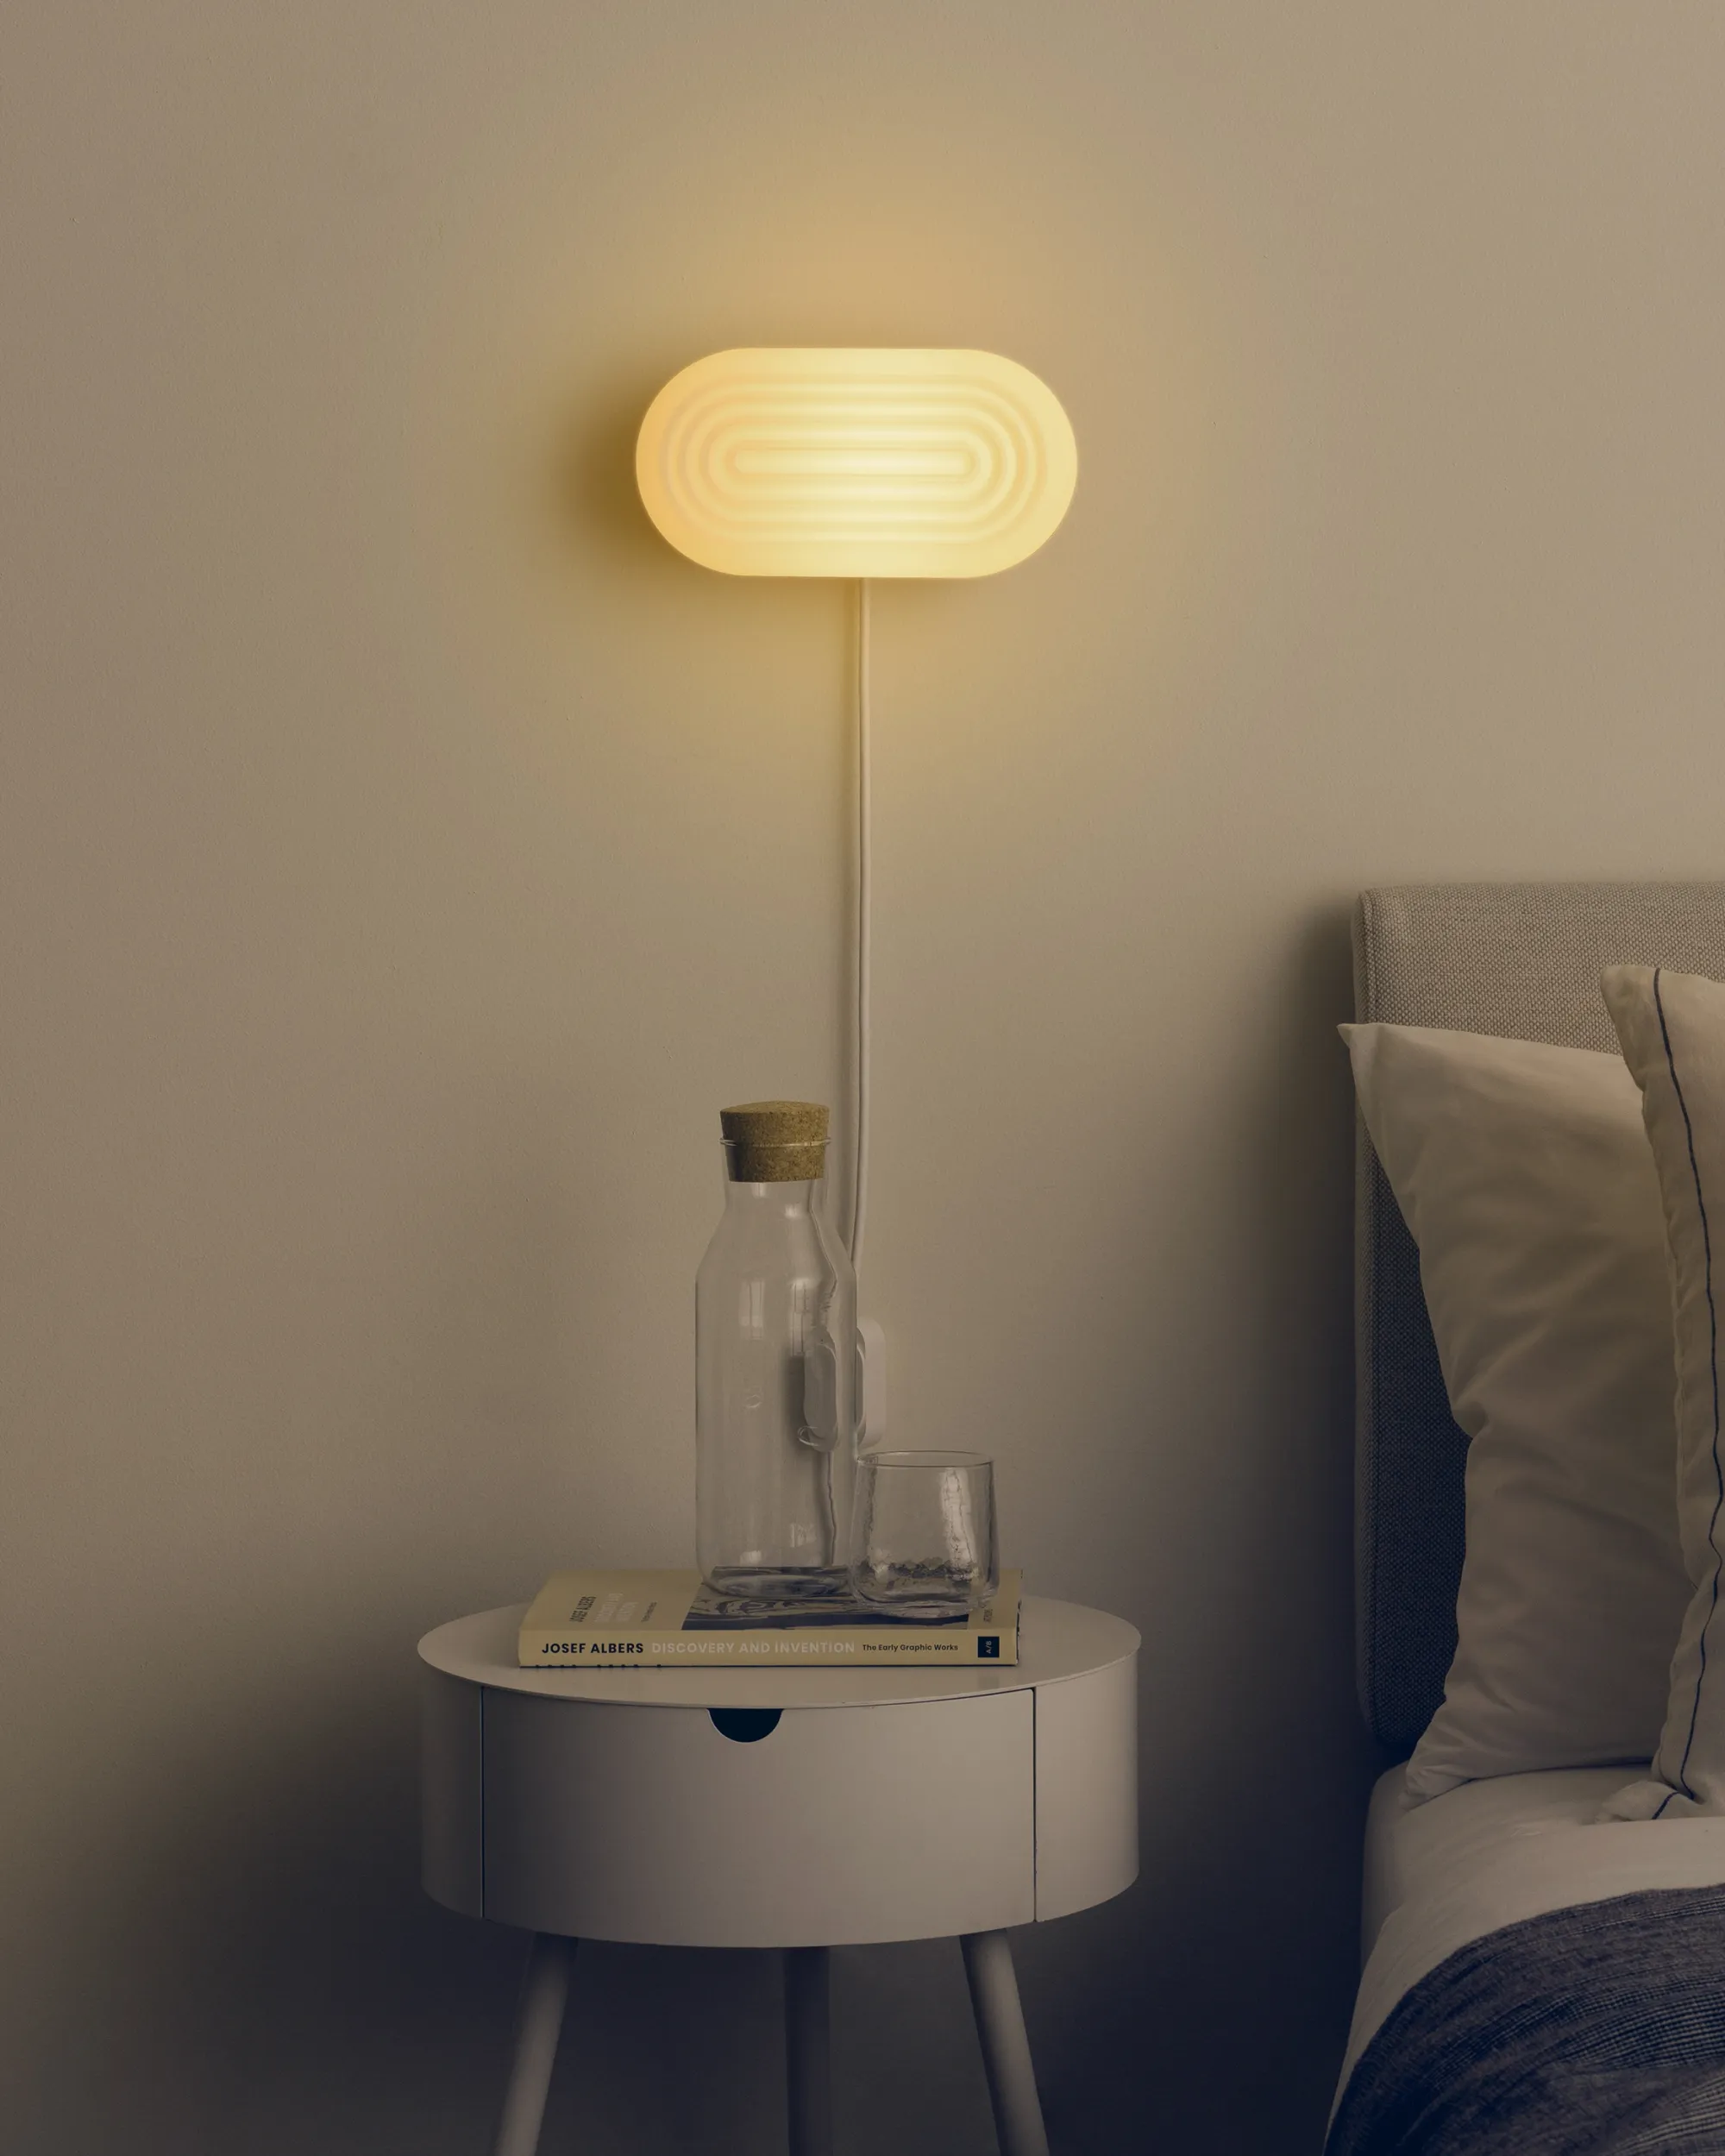 Gantri’s Focal Wall Light hangs above a bedside table and illuminates the space